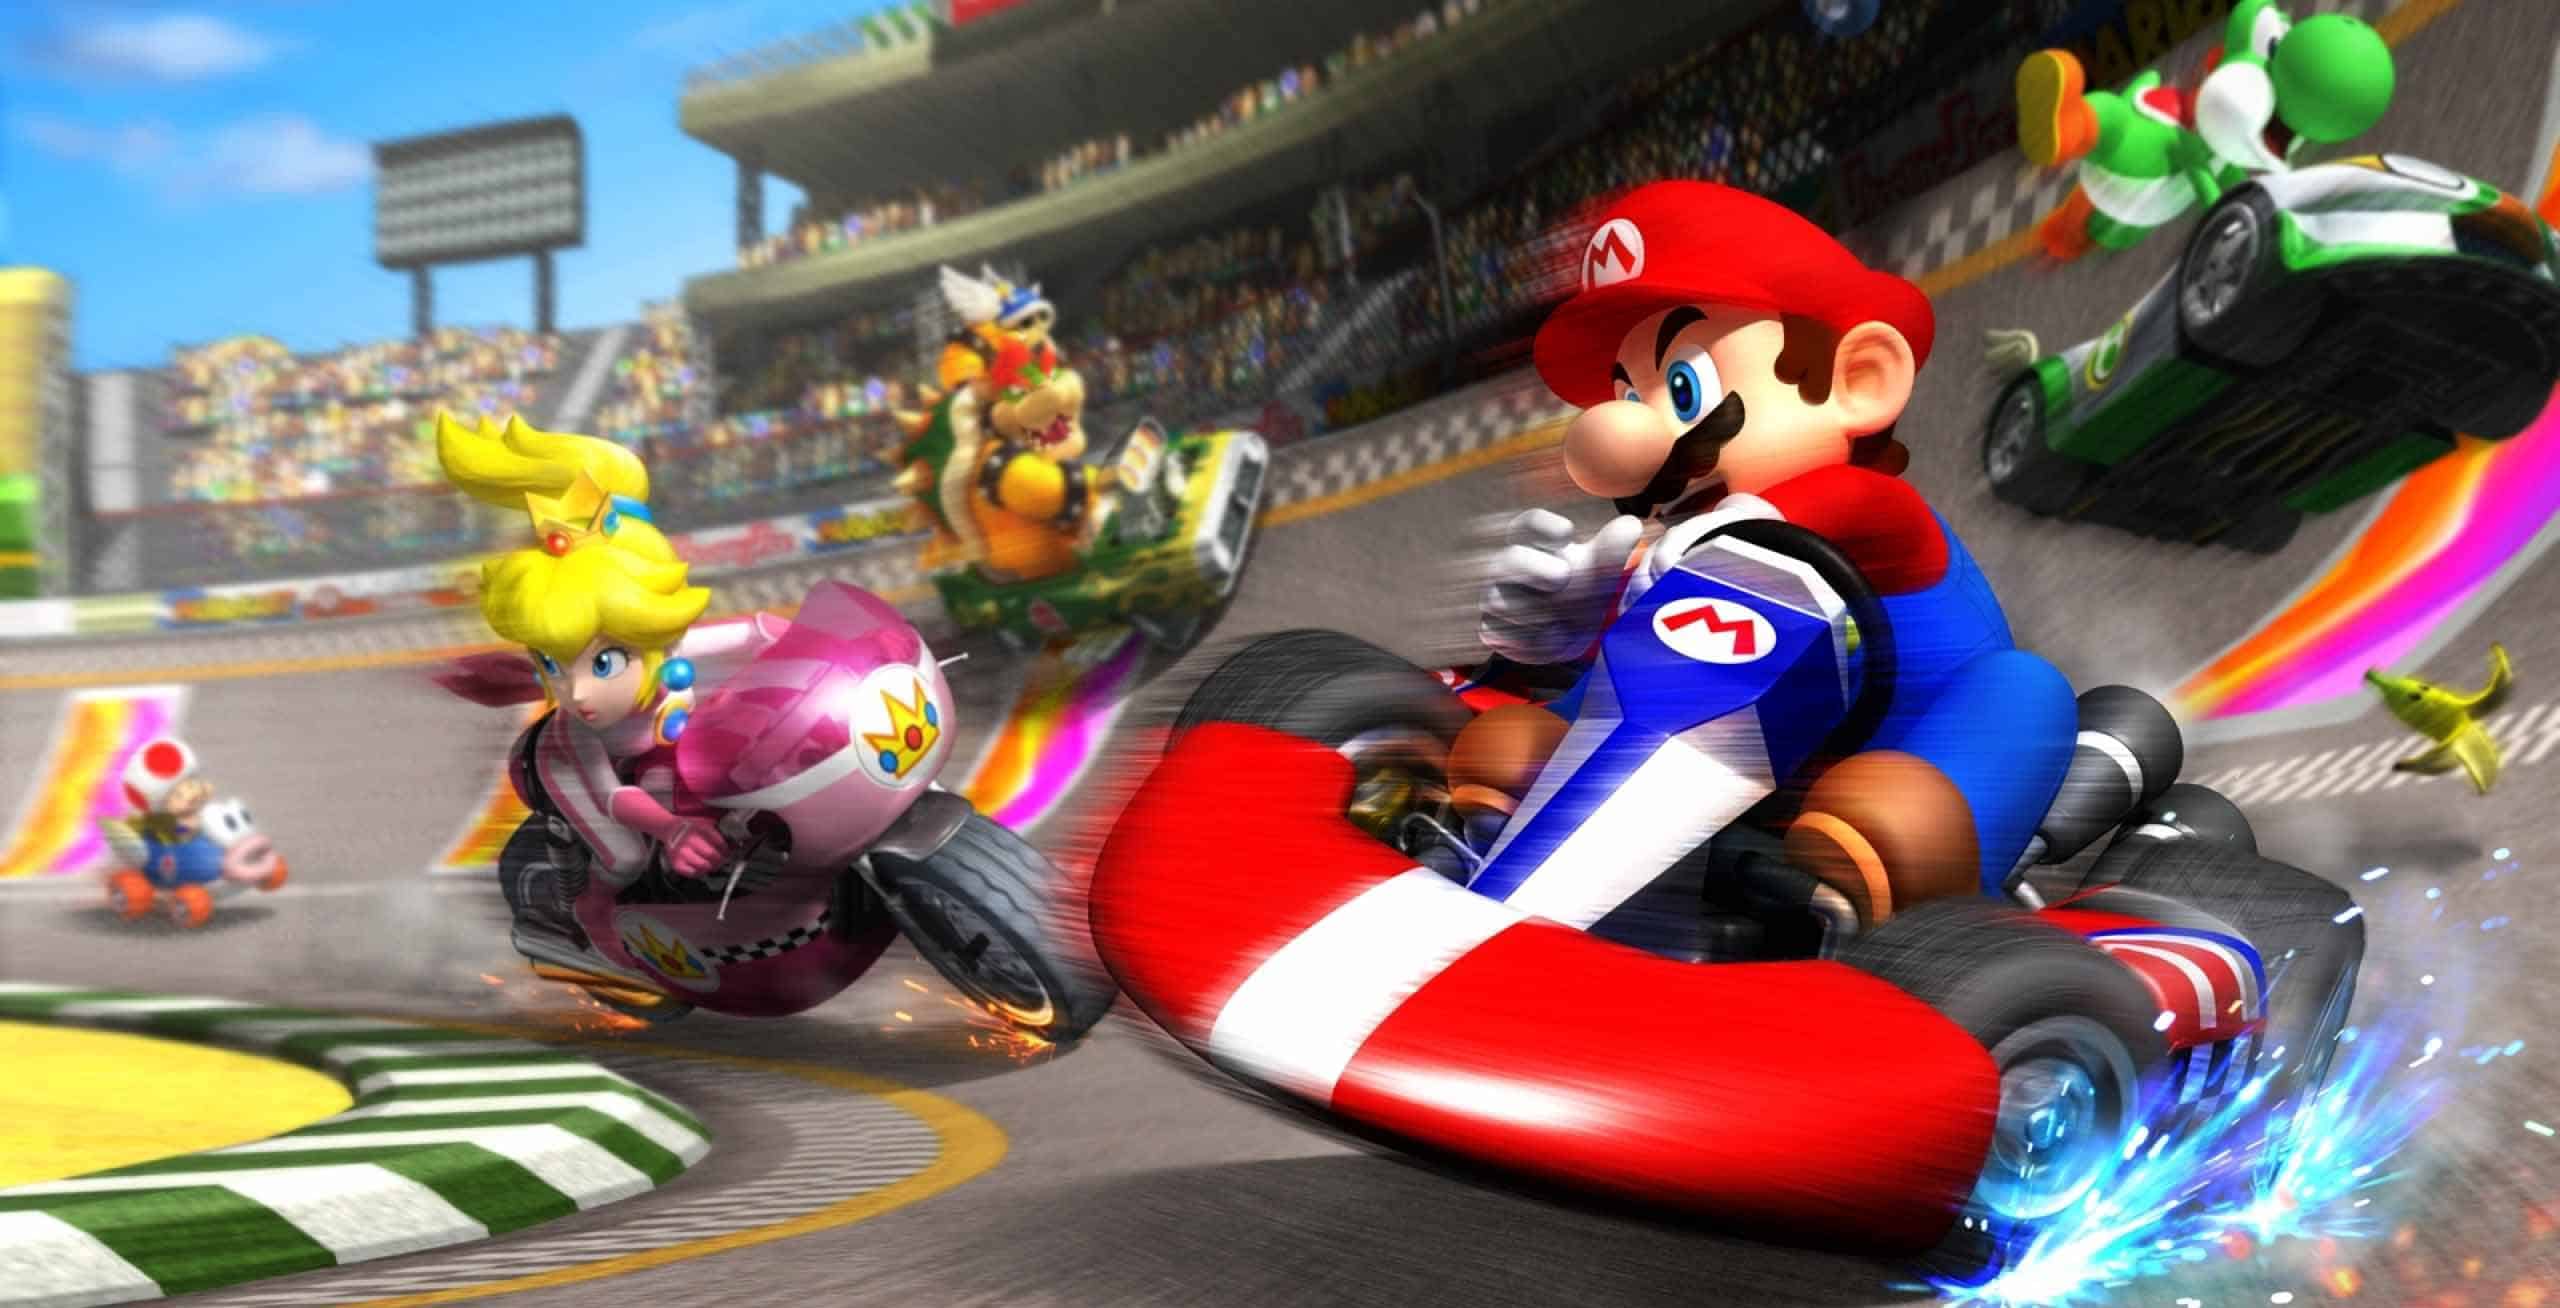 Promotional photo depicting many of the main playable characters in a race.